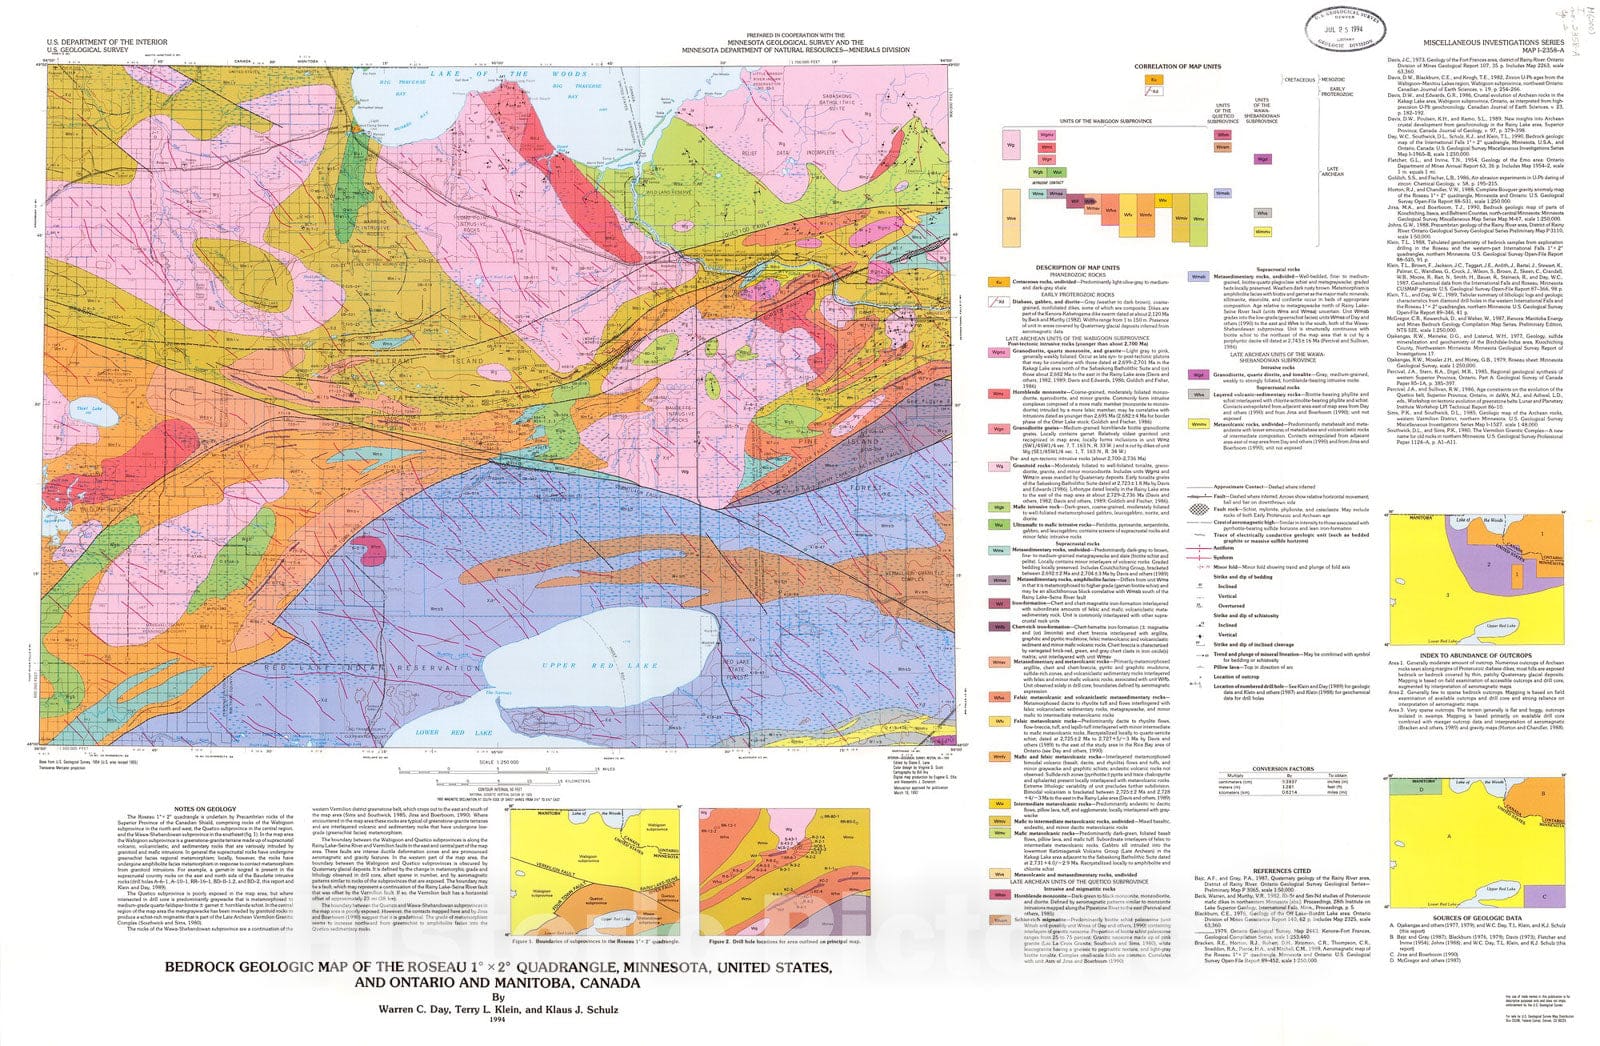 Map : Bedrock geologic map of the Roseau one degree x two degrees quadrangle, Minnesota, United States, and Ontario and Manitoba, Canada, one994 Cartography Wall Art :